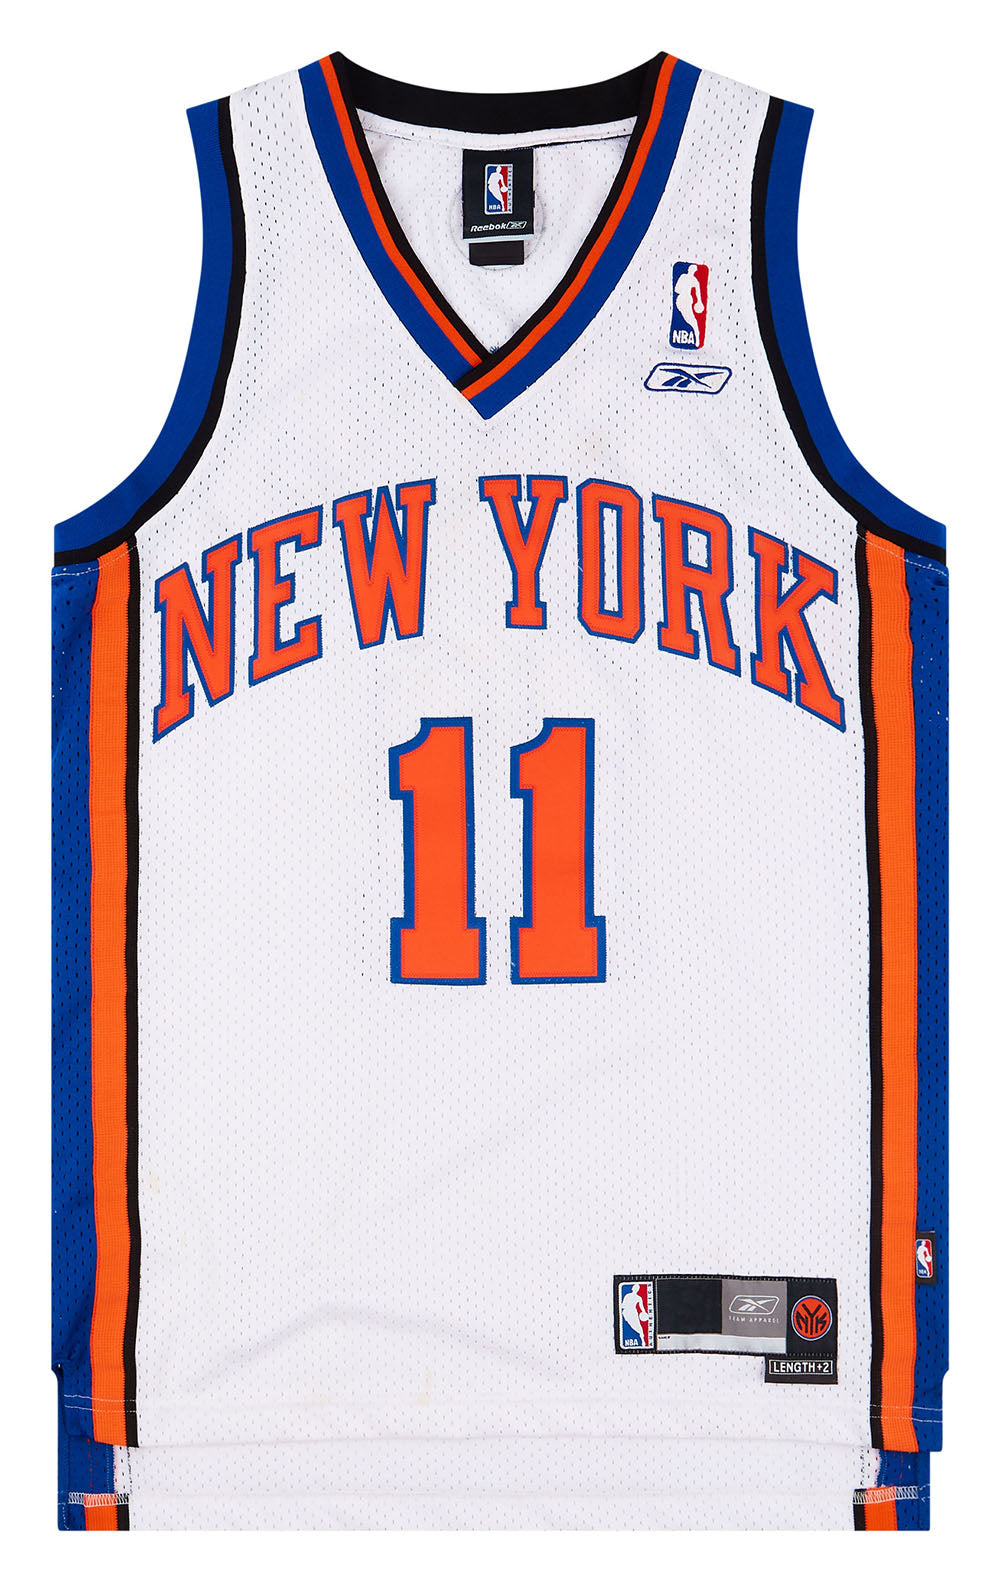 Knicks #25 Derrick Rose New White Stitched NBA Jersey on sale,for